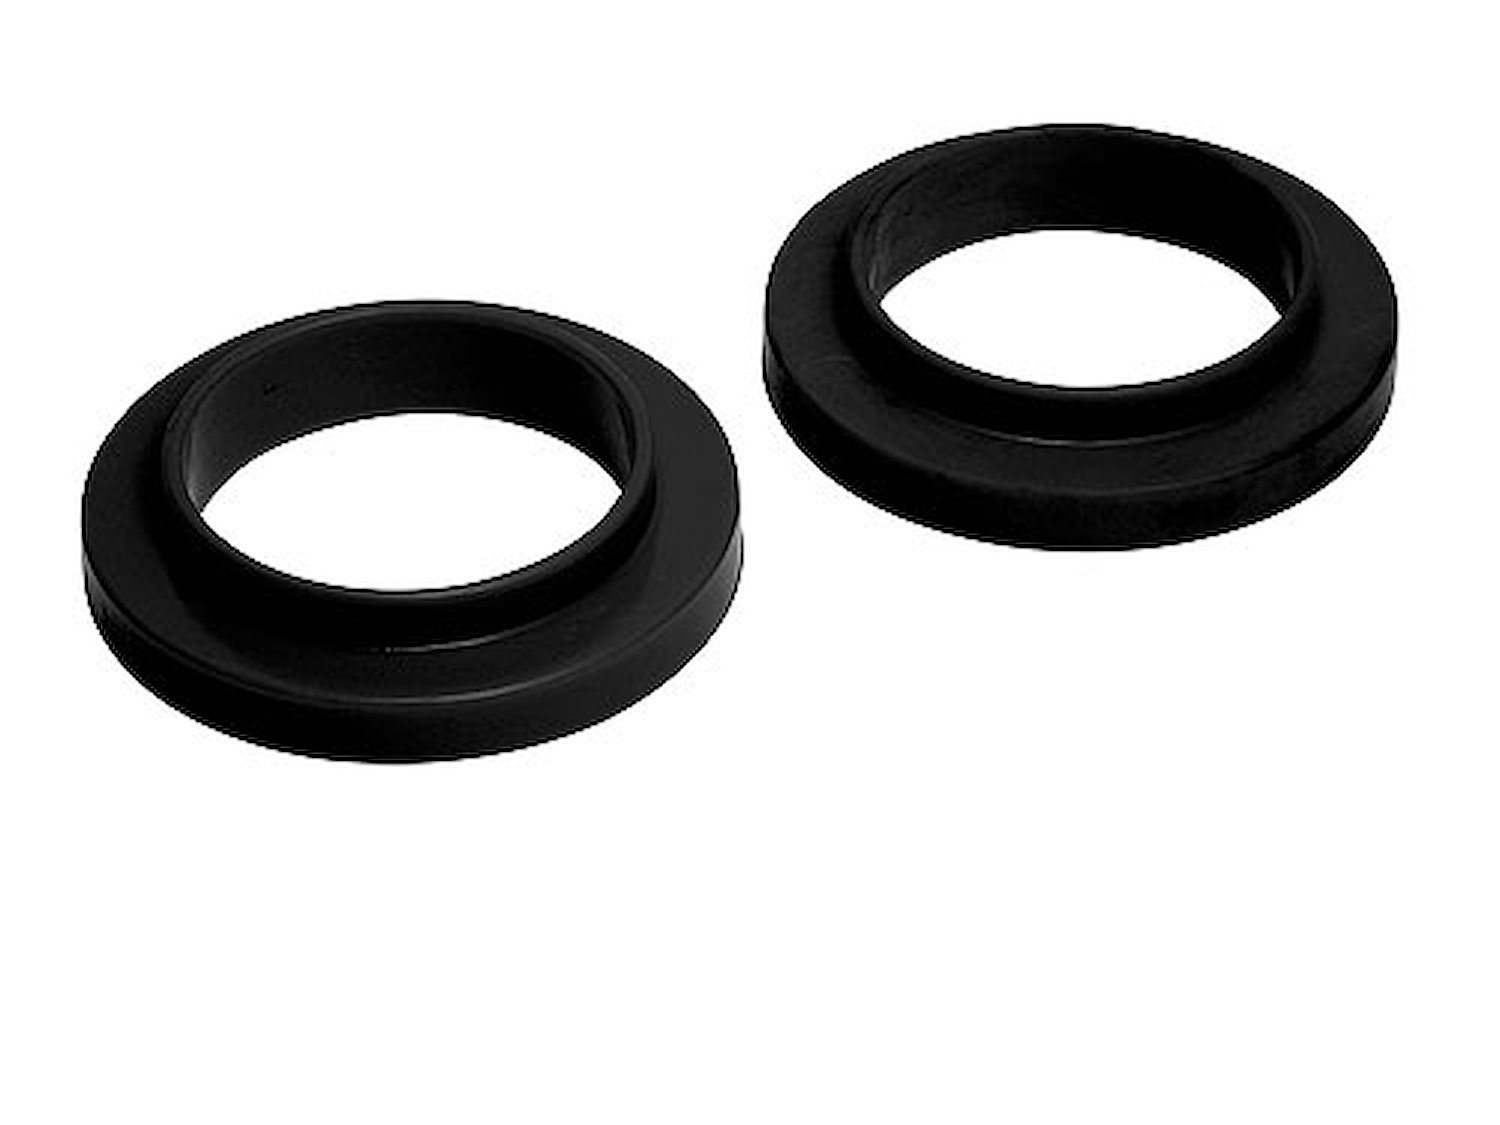 Front Coil Spring Spacers for 2007-2017 Chevy/GMC 1500 Truck and SUV